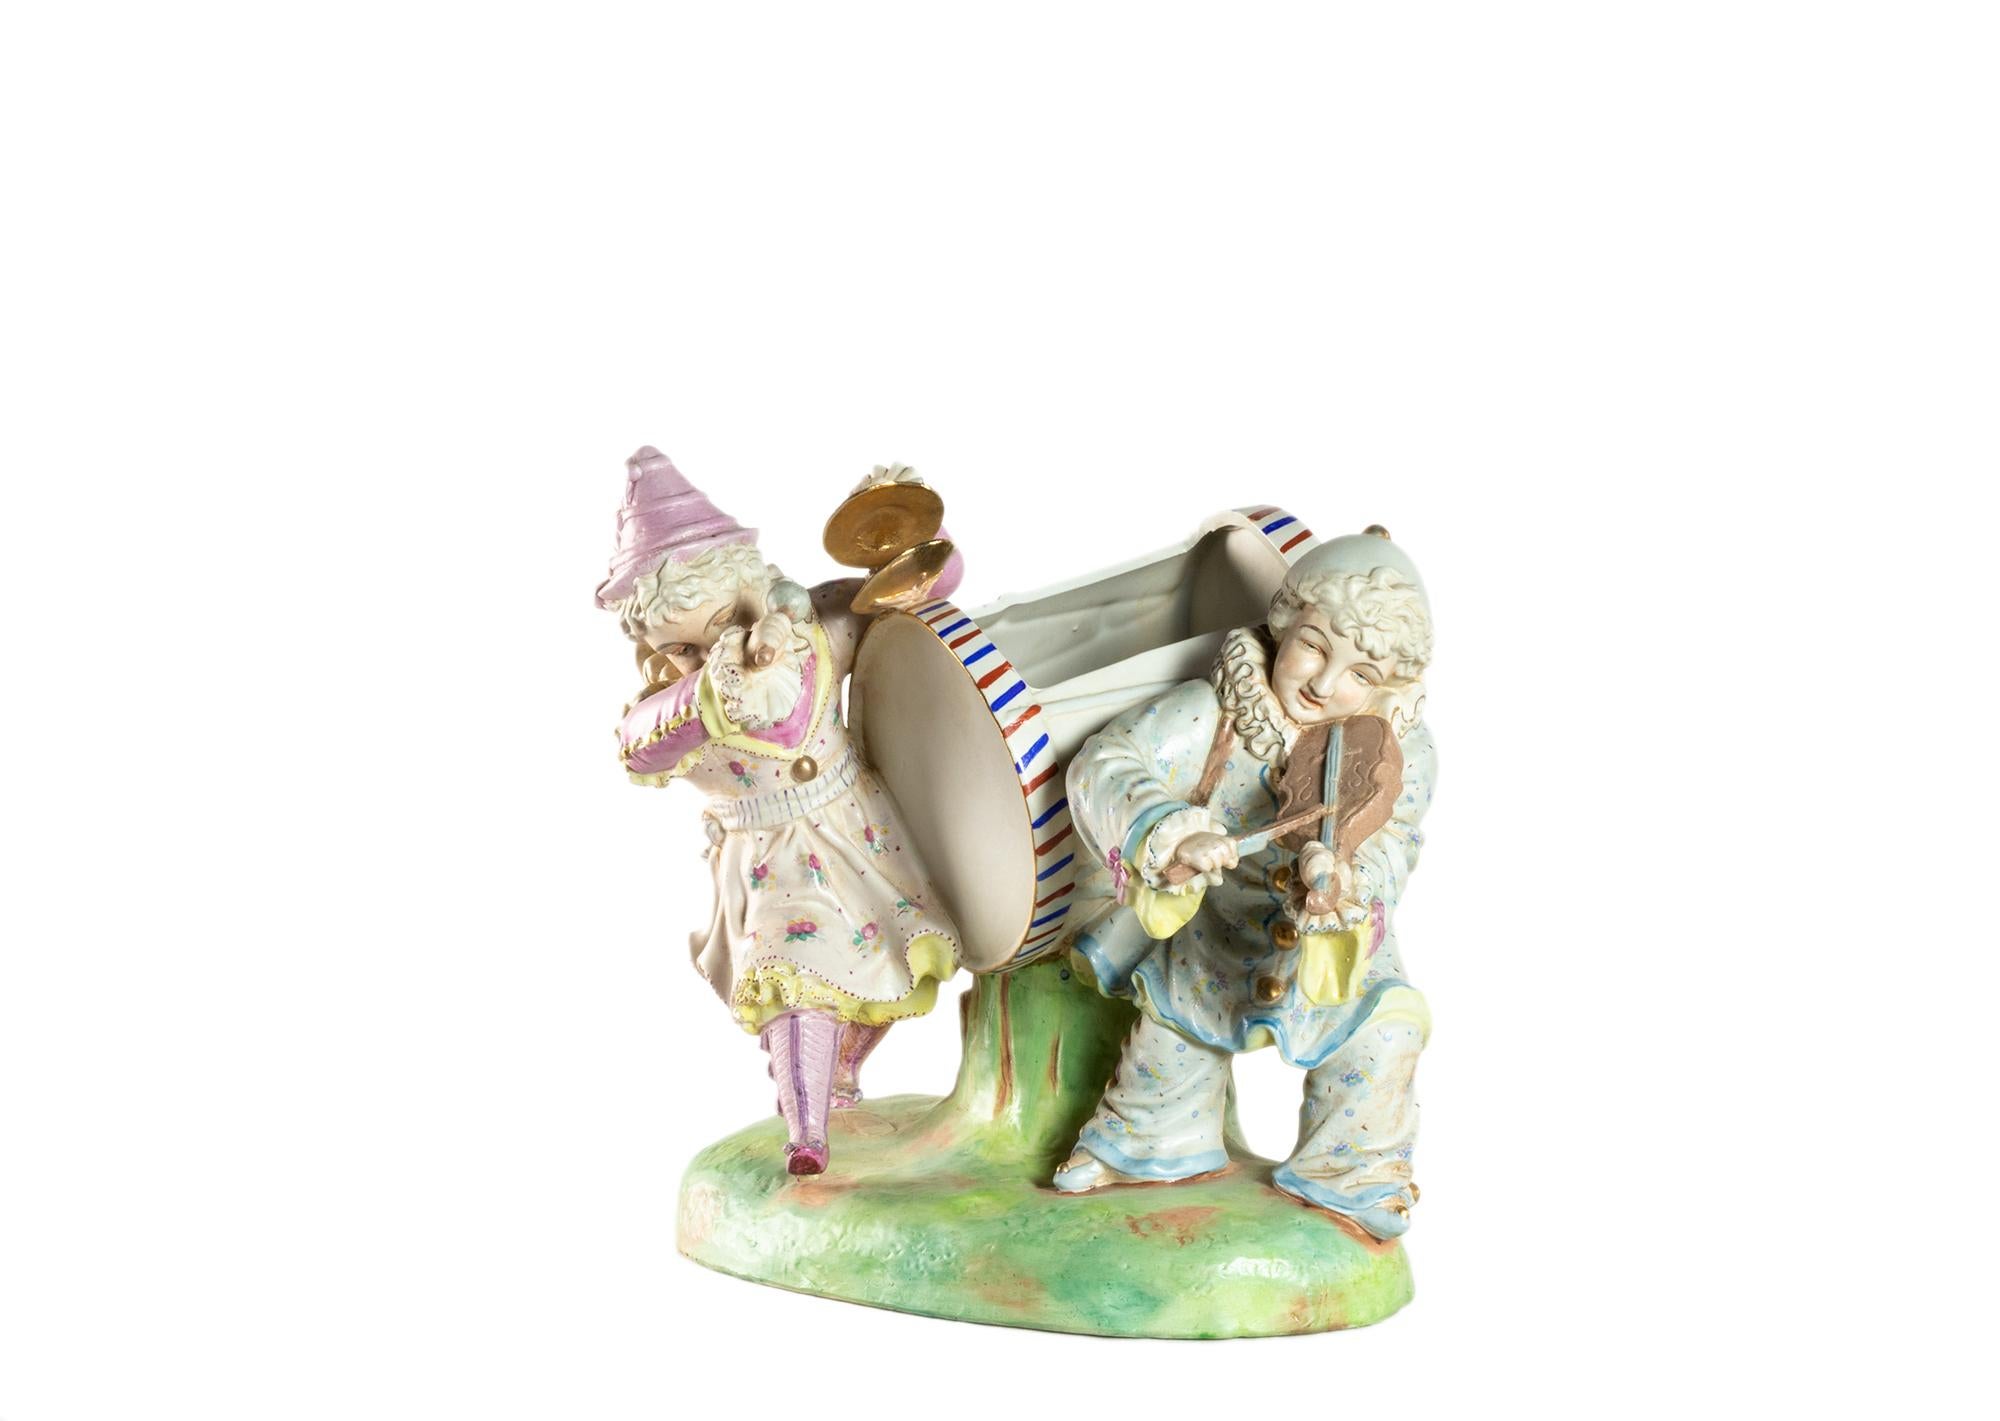 A Saxony art piece, large polychrome porcelain of a figurine of a male violinist and a women`s percussionist musicians decorated in the pierrot.
A dreamlike motif of youth playing music.
Style of the late XVII century and XIX century in the